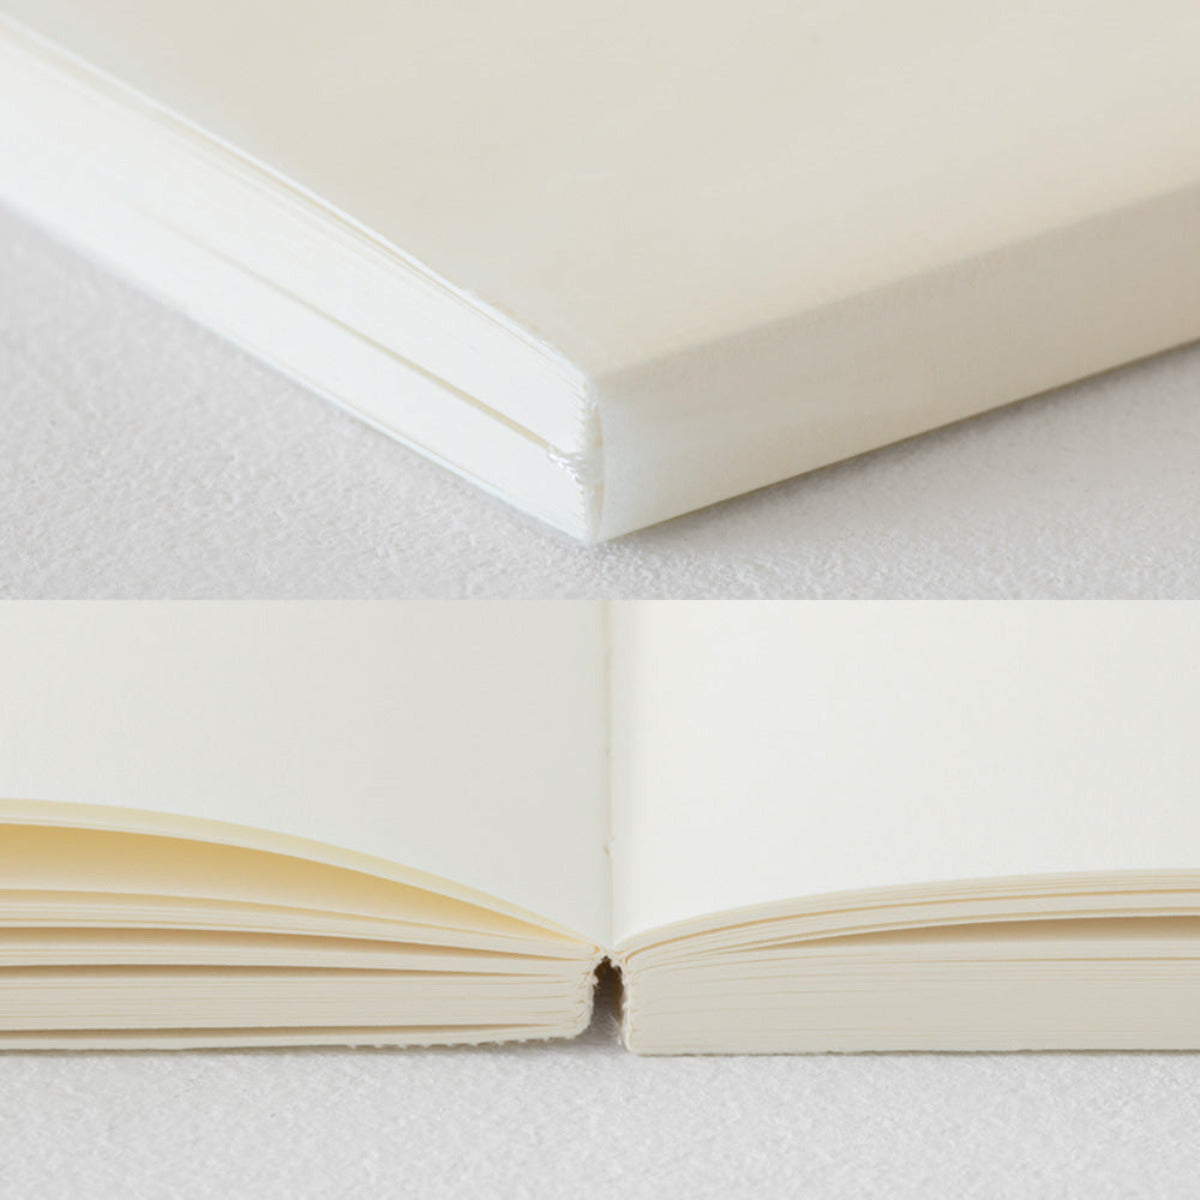 Blank MD Notebook Cotton // Three Sizes